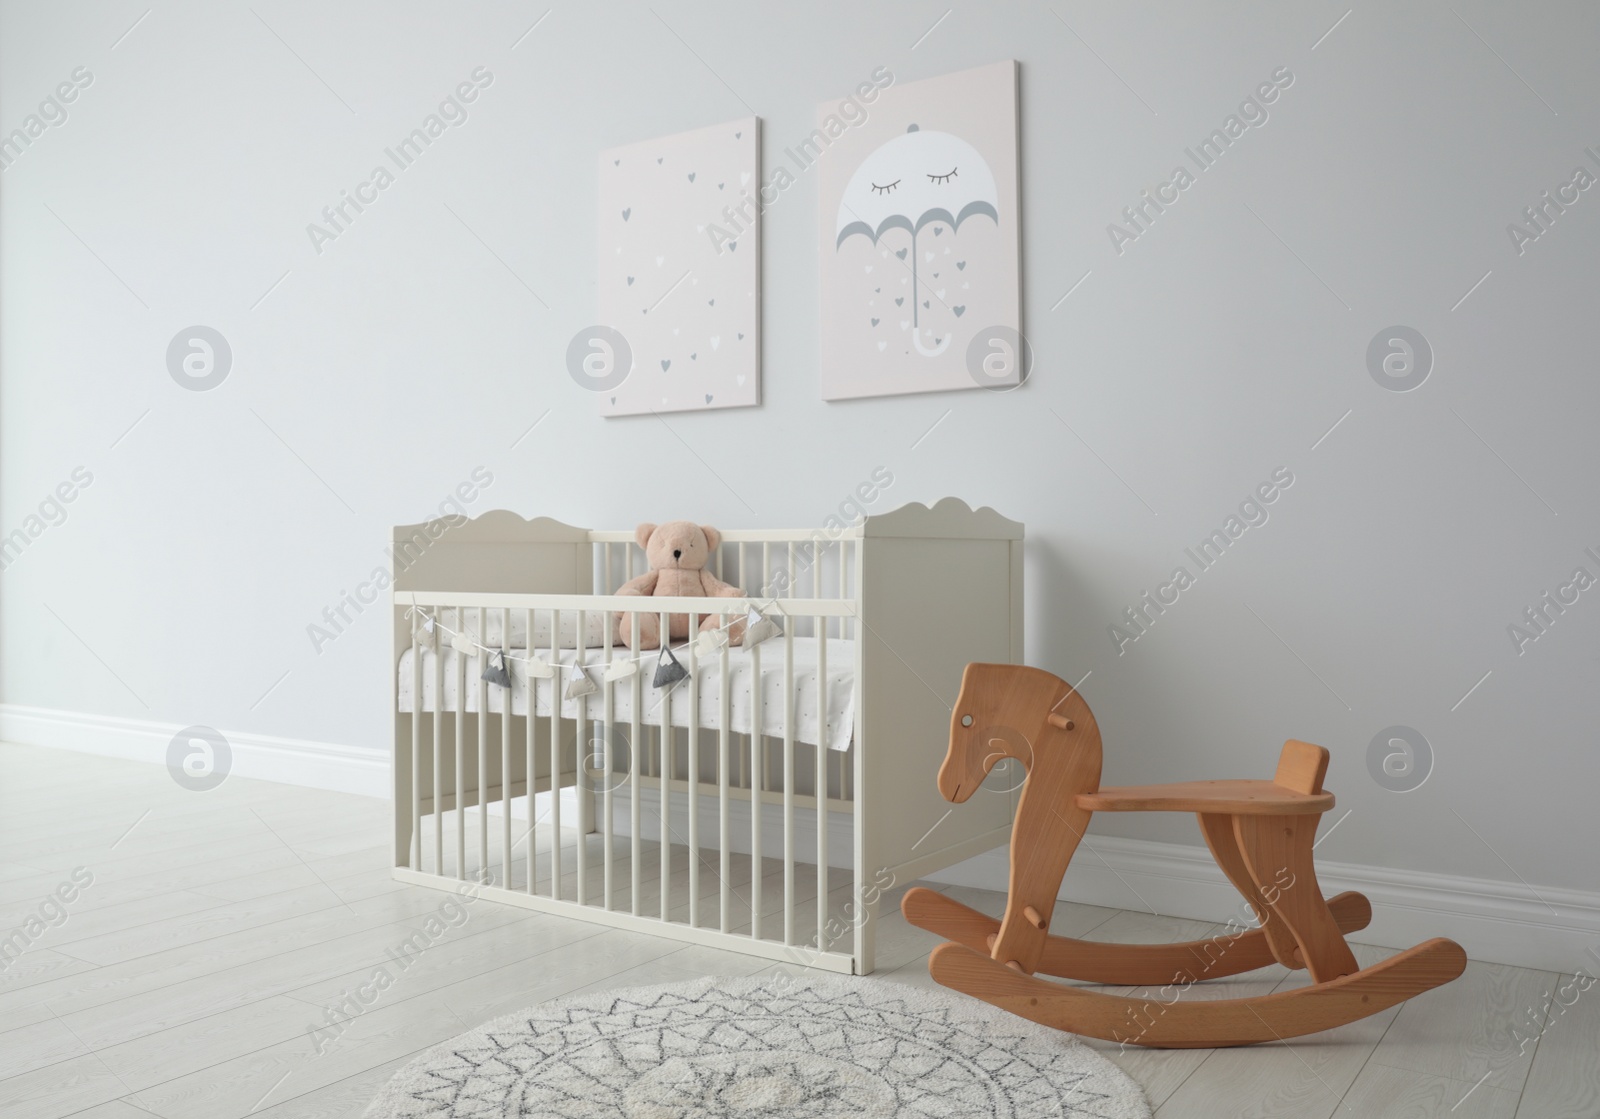 Photo of Minimalist room interior with baby crib, decor elements and toys